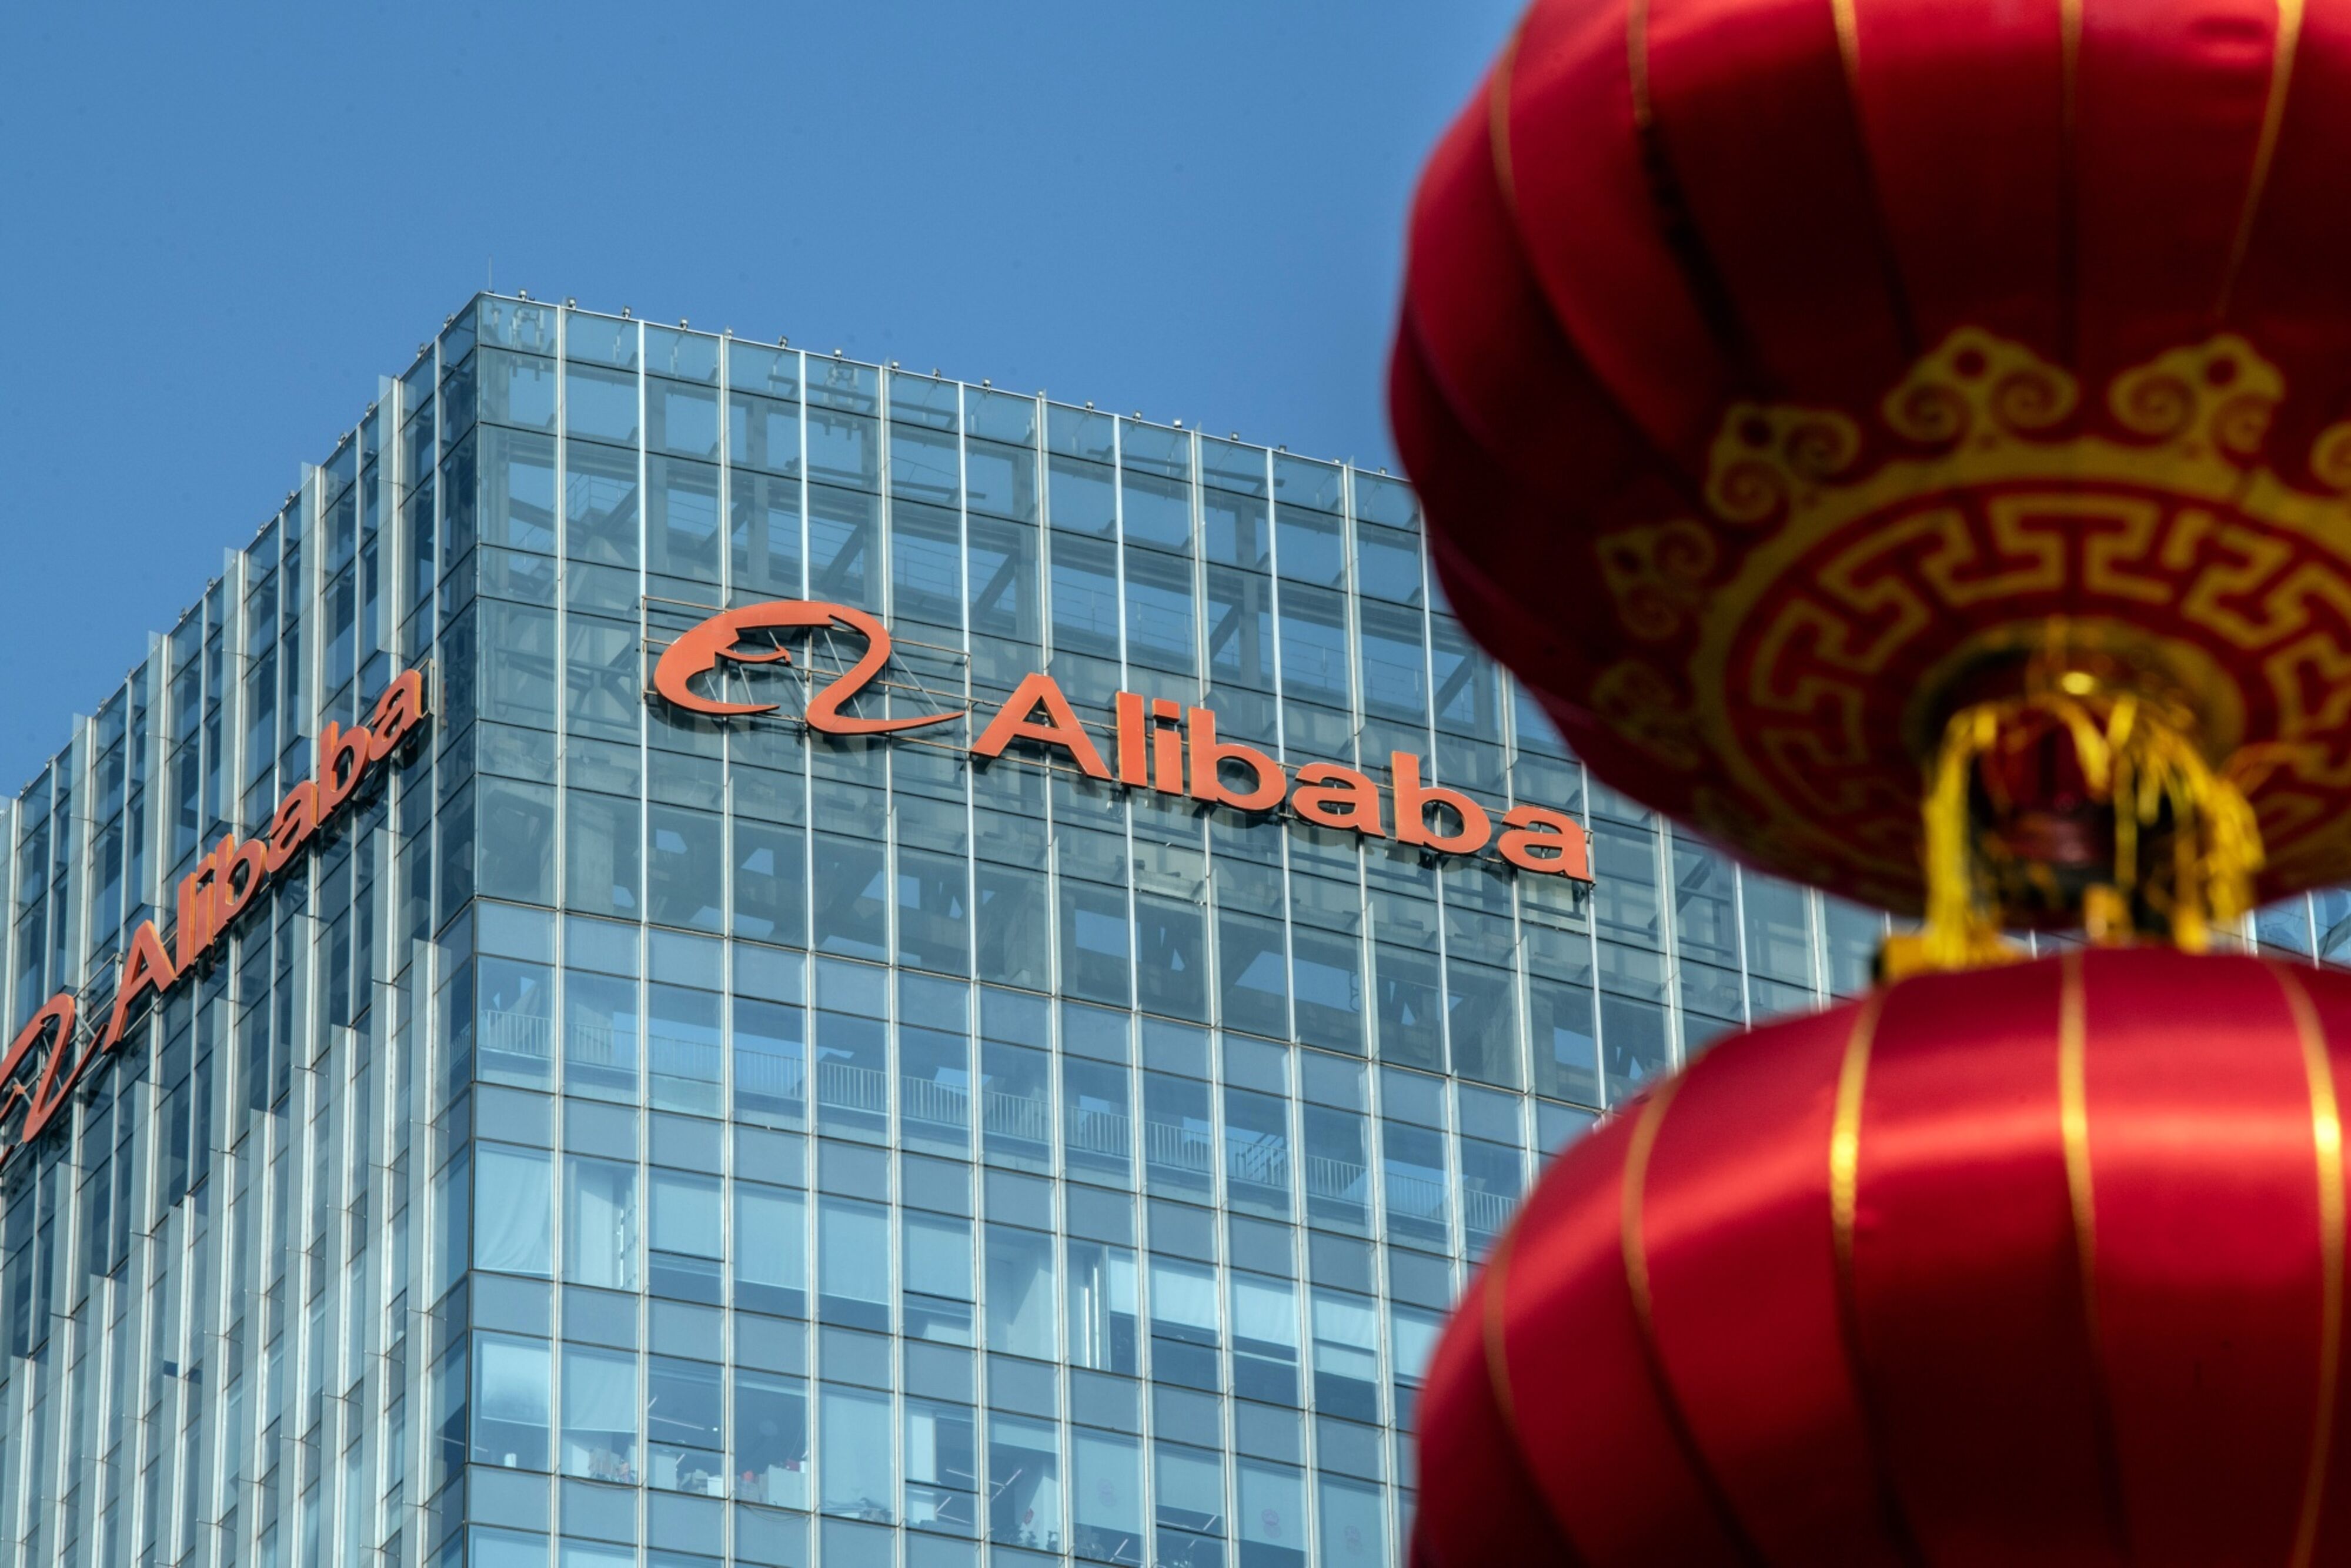 Alibaba’s corporate structure is highly complex and undergoing an overhaul as the company considers splitting off several tentpole business lines into standalone companies. Photo: Bloomberg